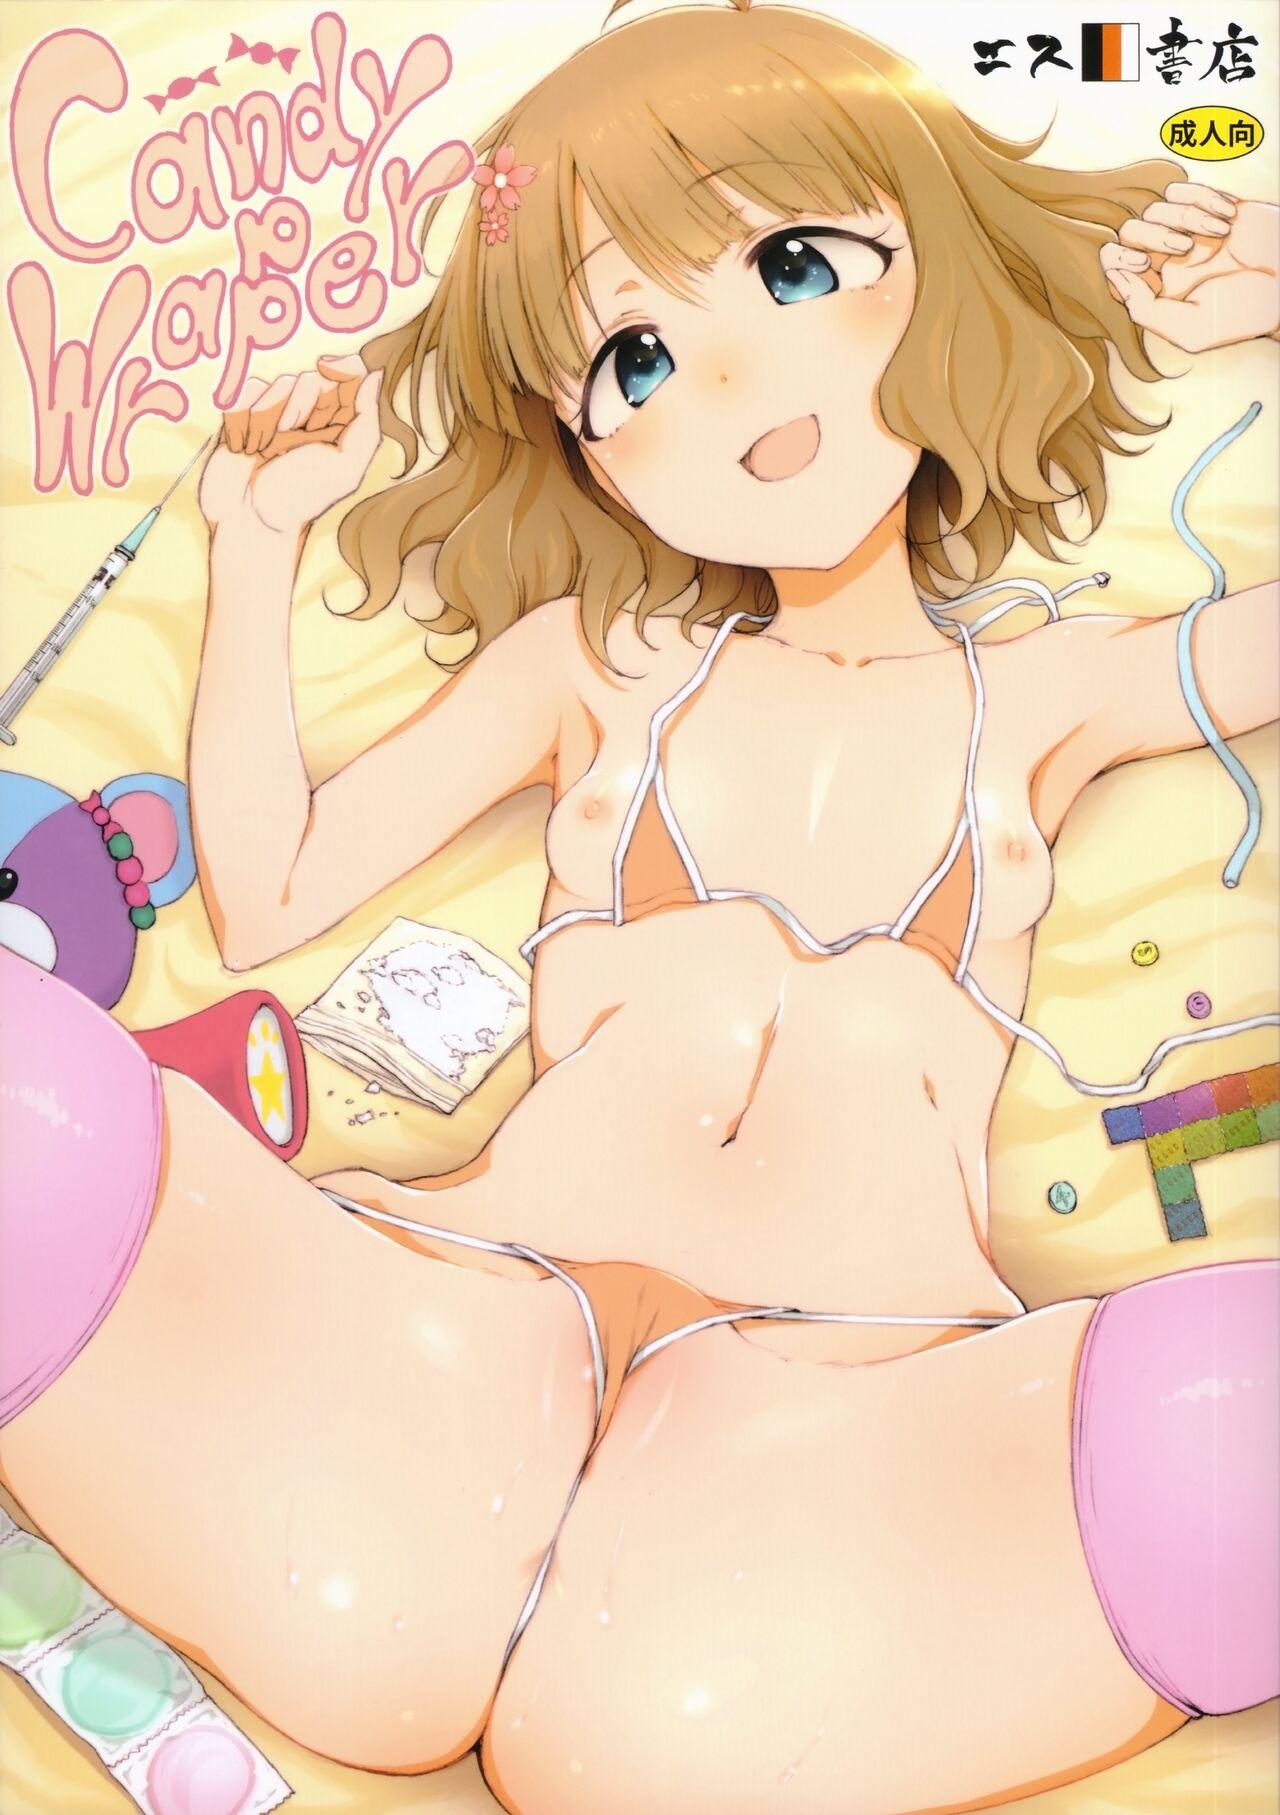 Enema Candy Wrapper - The idolmaster Fuck Com - Page 2